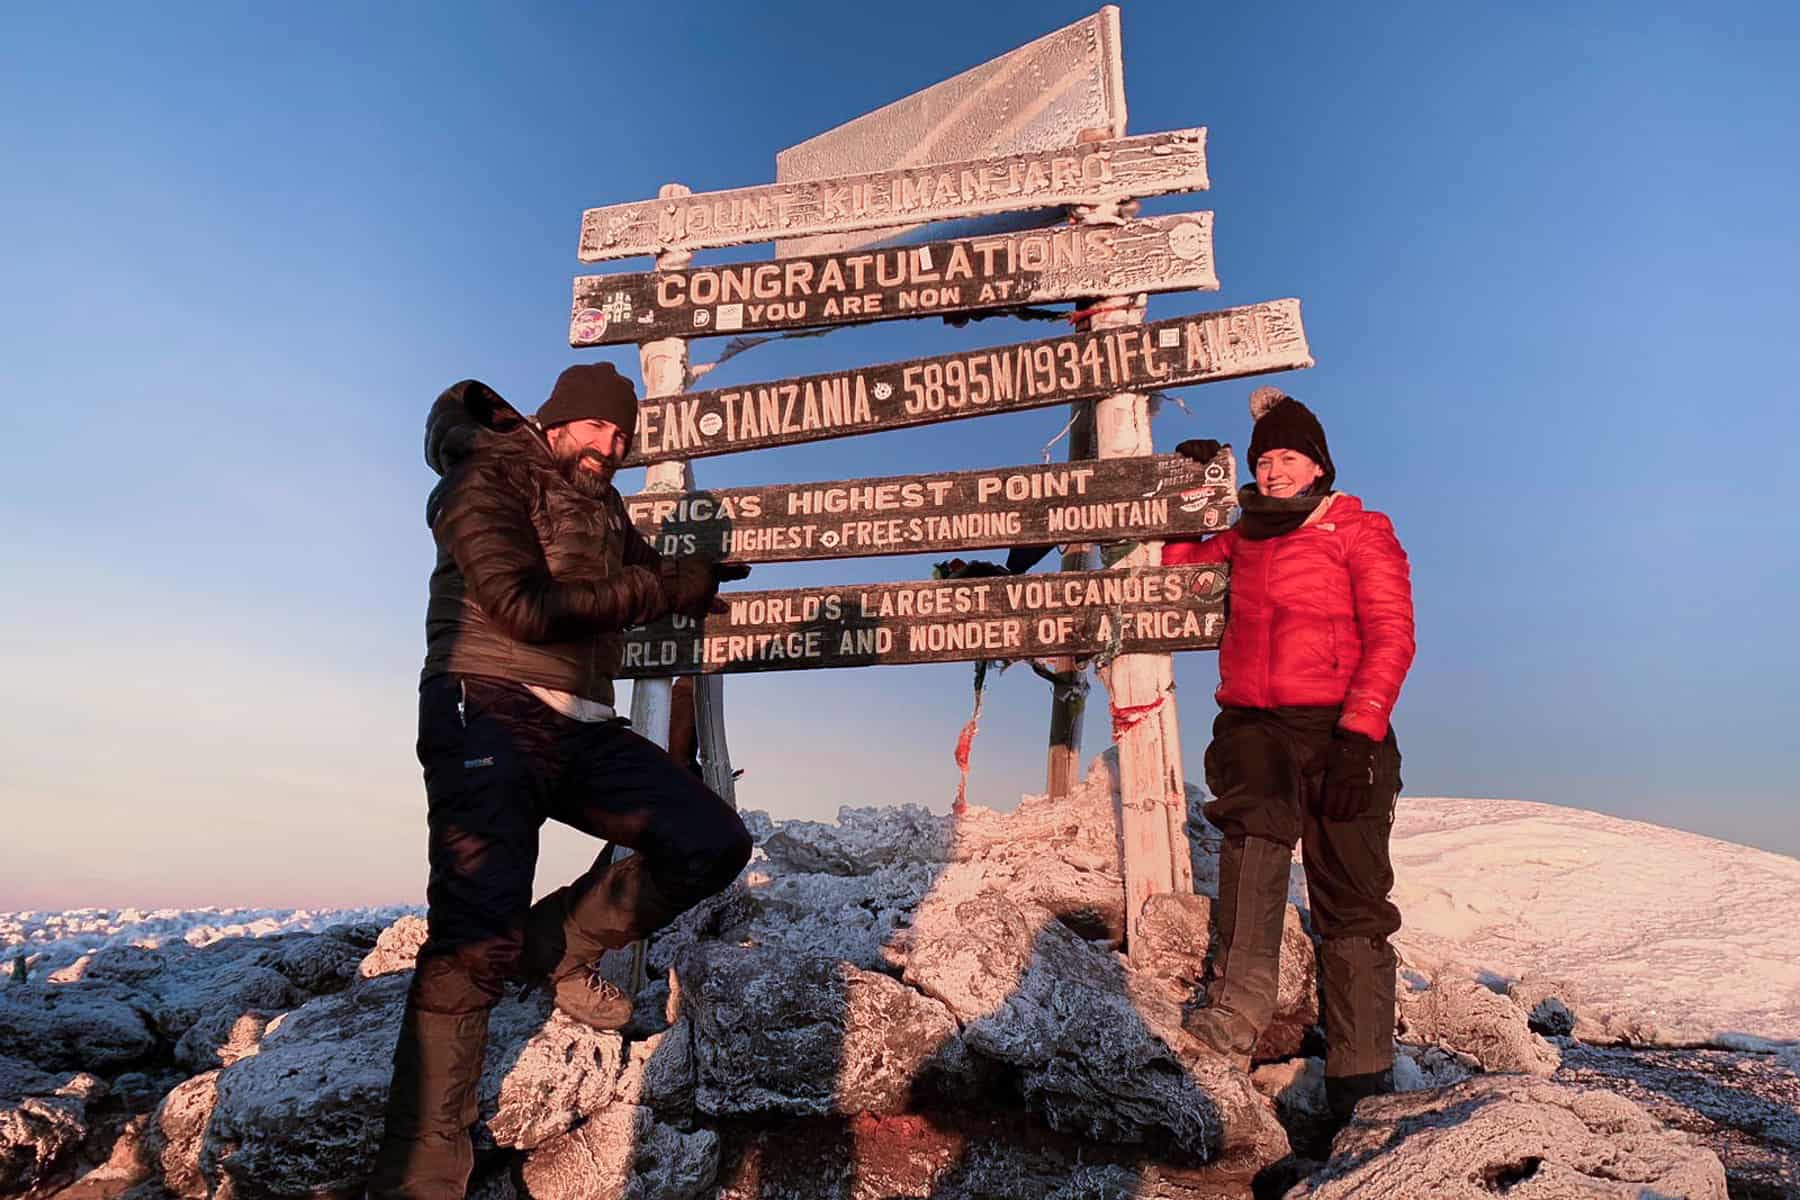 A man and woman stand in front of the mountain top, snow-covered wooden sign for Uhuru Peak after climbing Kilimanjaro